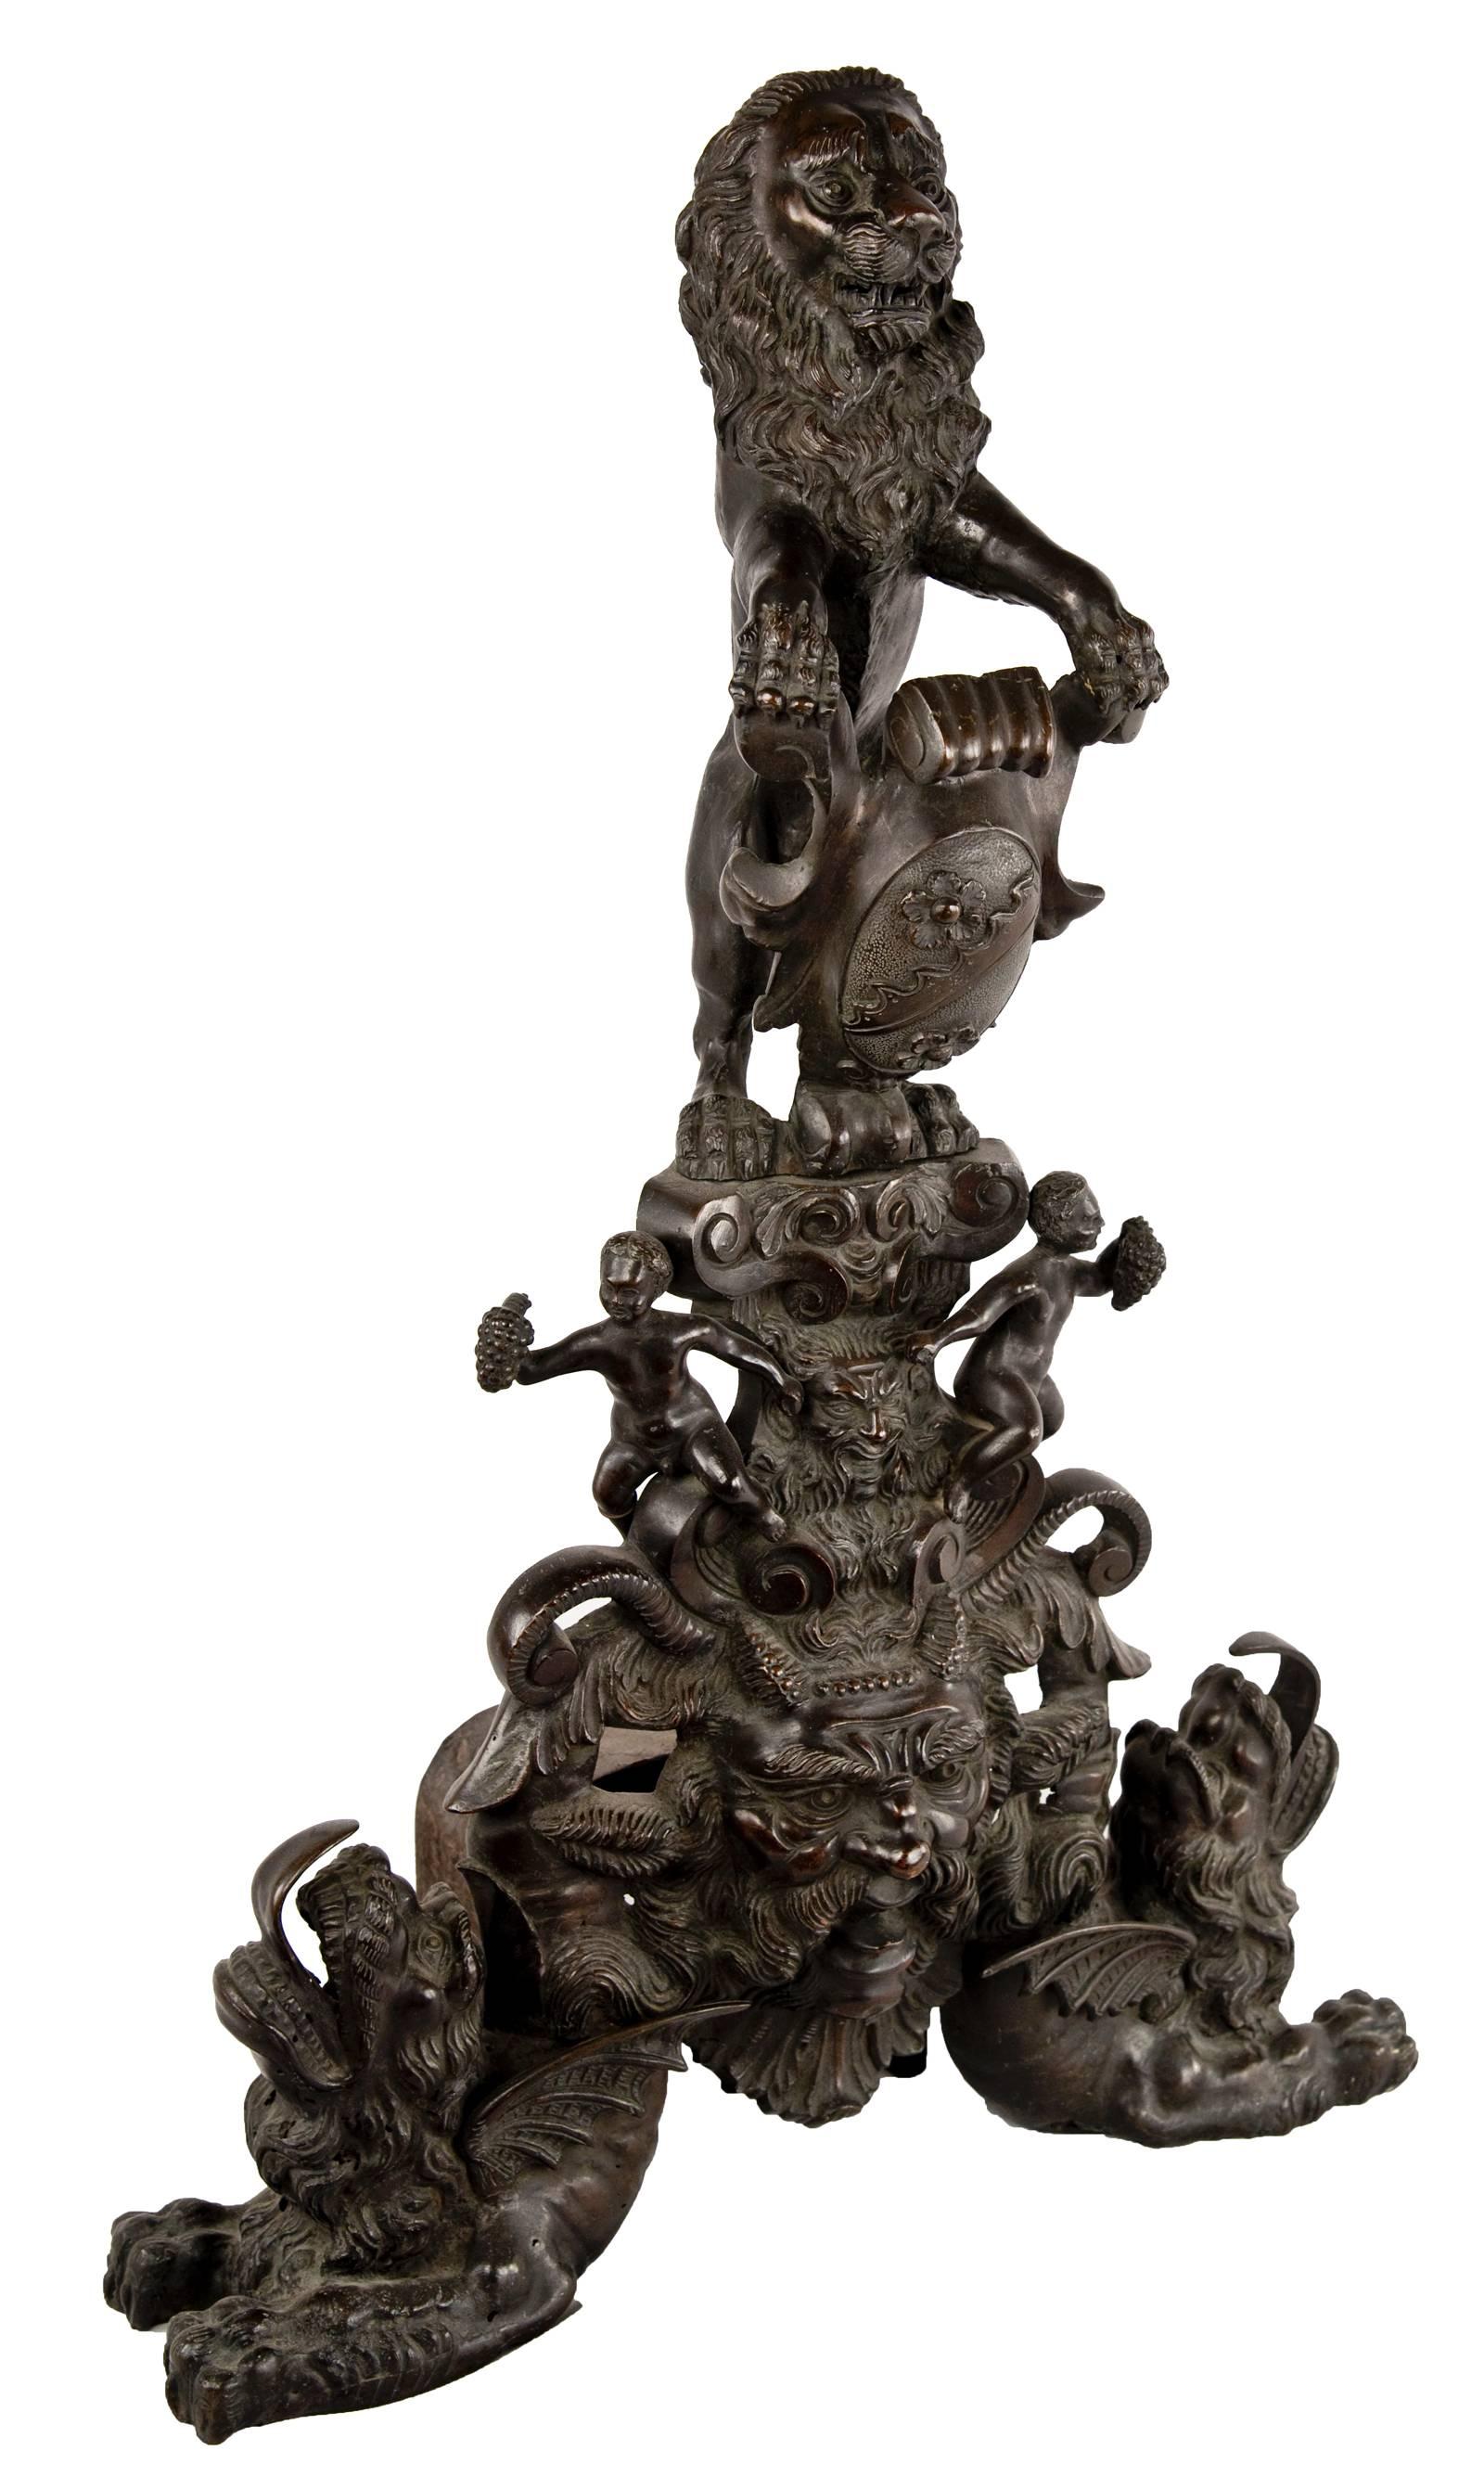 On a pedestal, standing stoically on its hind legs is a lion supported by a scrolled coat of arms. Beneath the pedestal two figures clasp a face medallion with one hand and hold grapes in the other, surmounting the carved head of Bacchus, which is